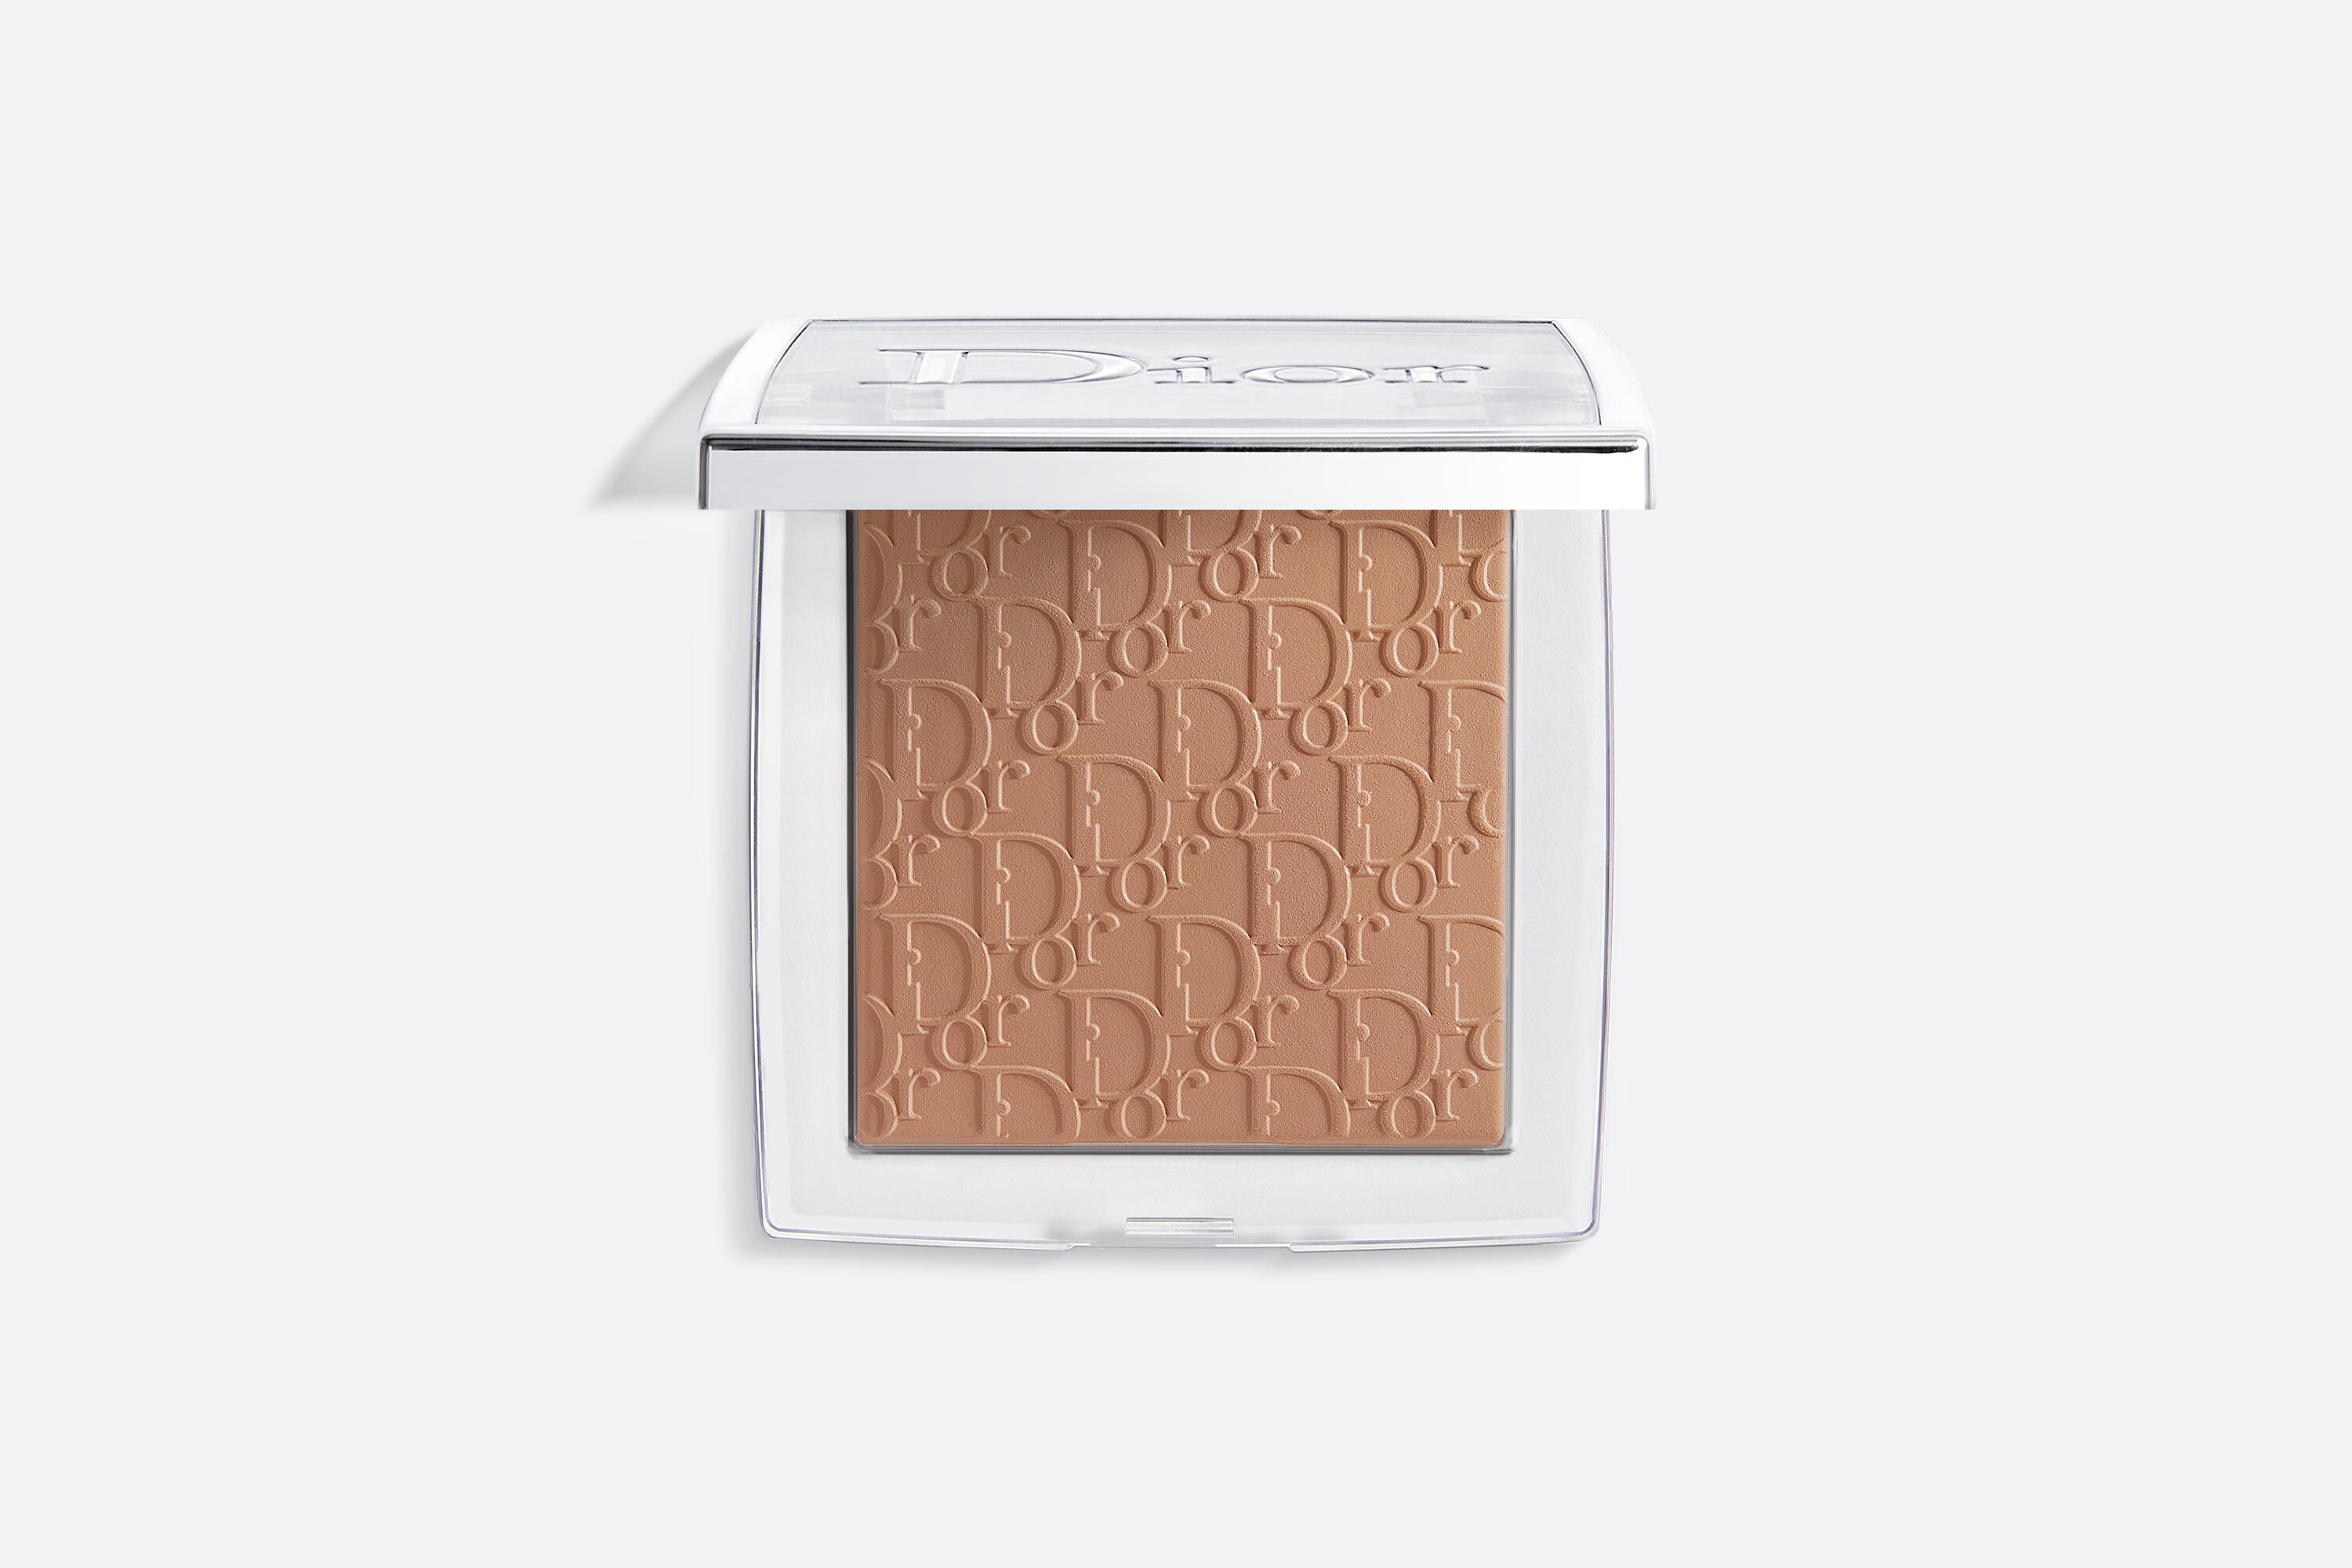 DIOR BACKSTAGE Face  Body PowdernoPowder  a thin lightweight  gelbased face powder from a patented technology